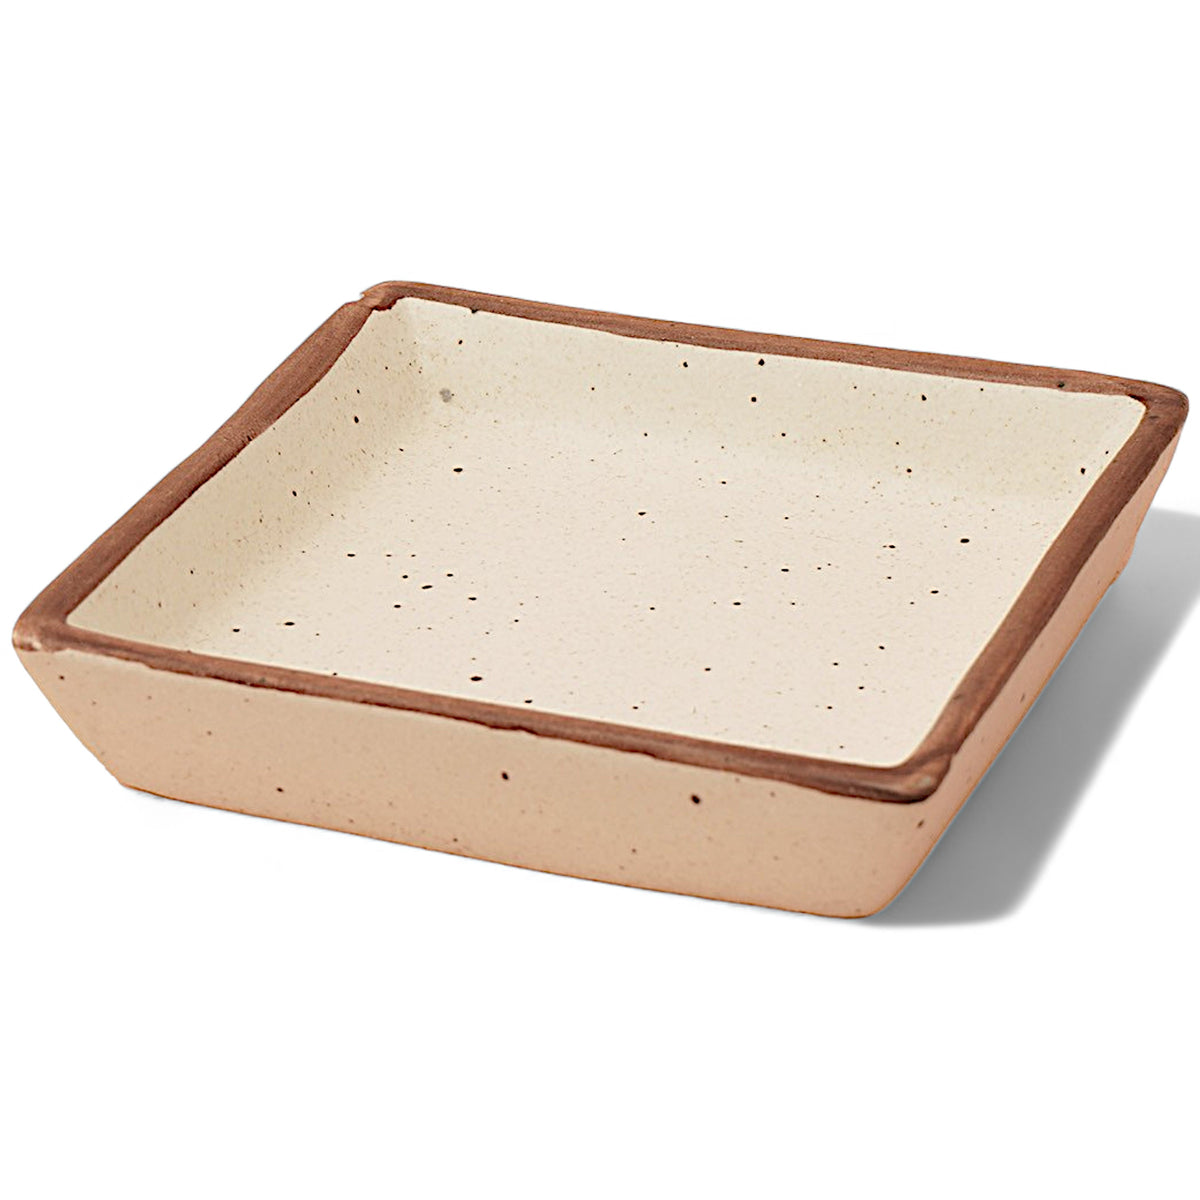 Claymistry Small Ceramic Snacks Ivory with Brown Edges Square Shaped Serving Tray | 13cm * 13cm * 3cm | Matte | Dishwasher & Microwave Safe | Biscuit, Namkeen, Chips, Tray | Premium Kitchen Crockery